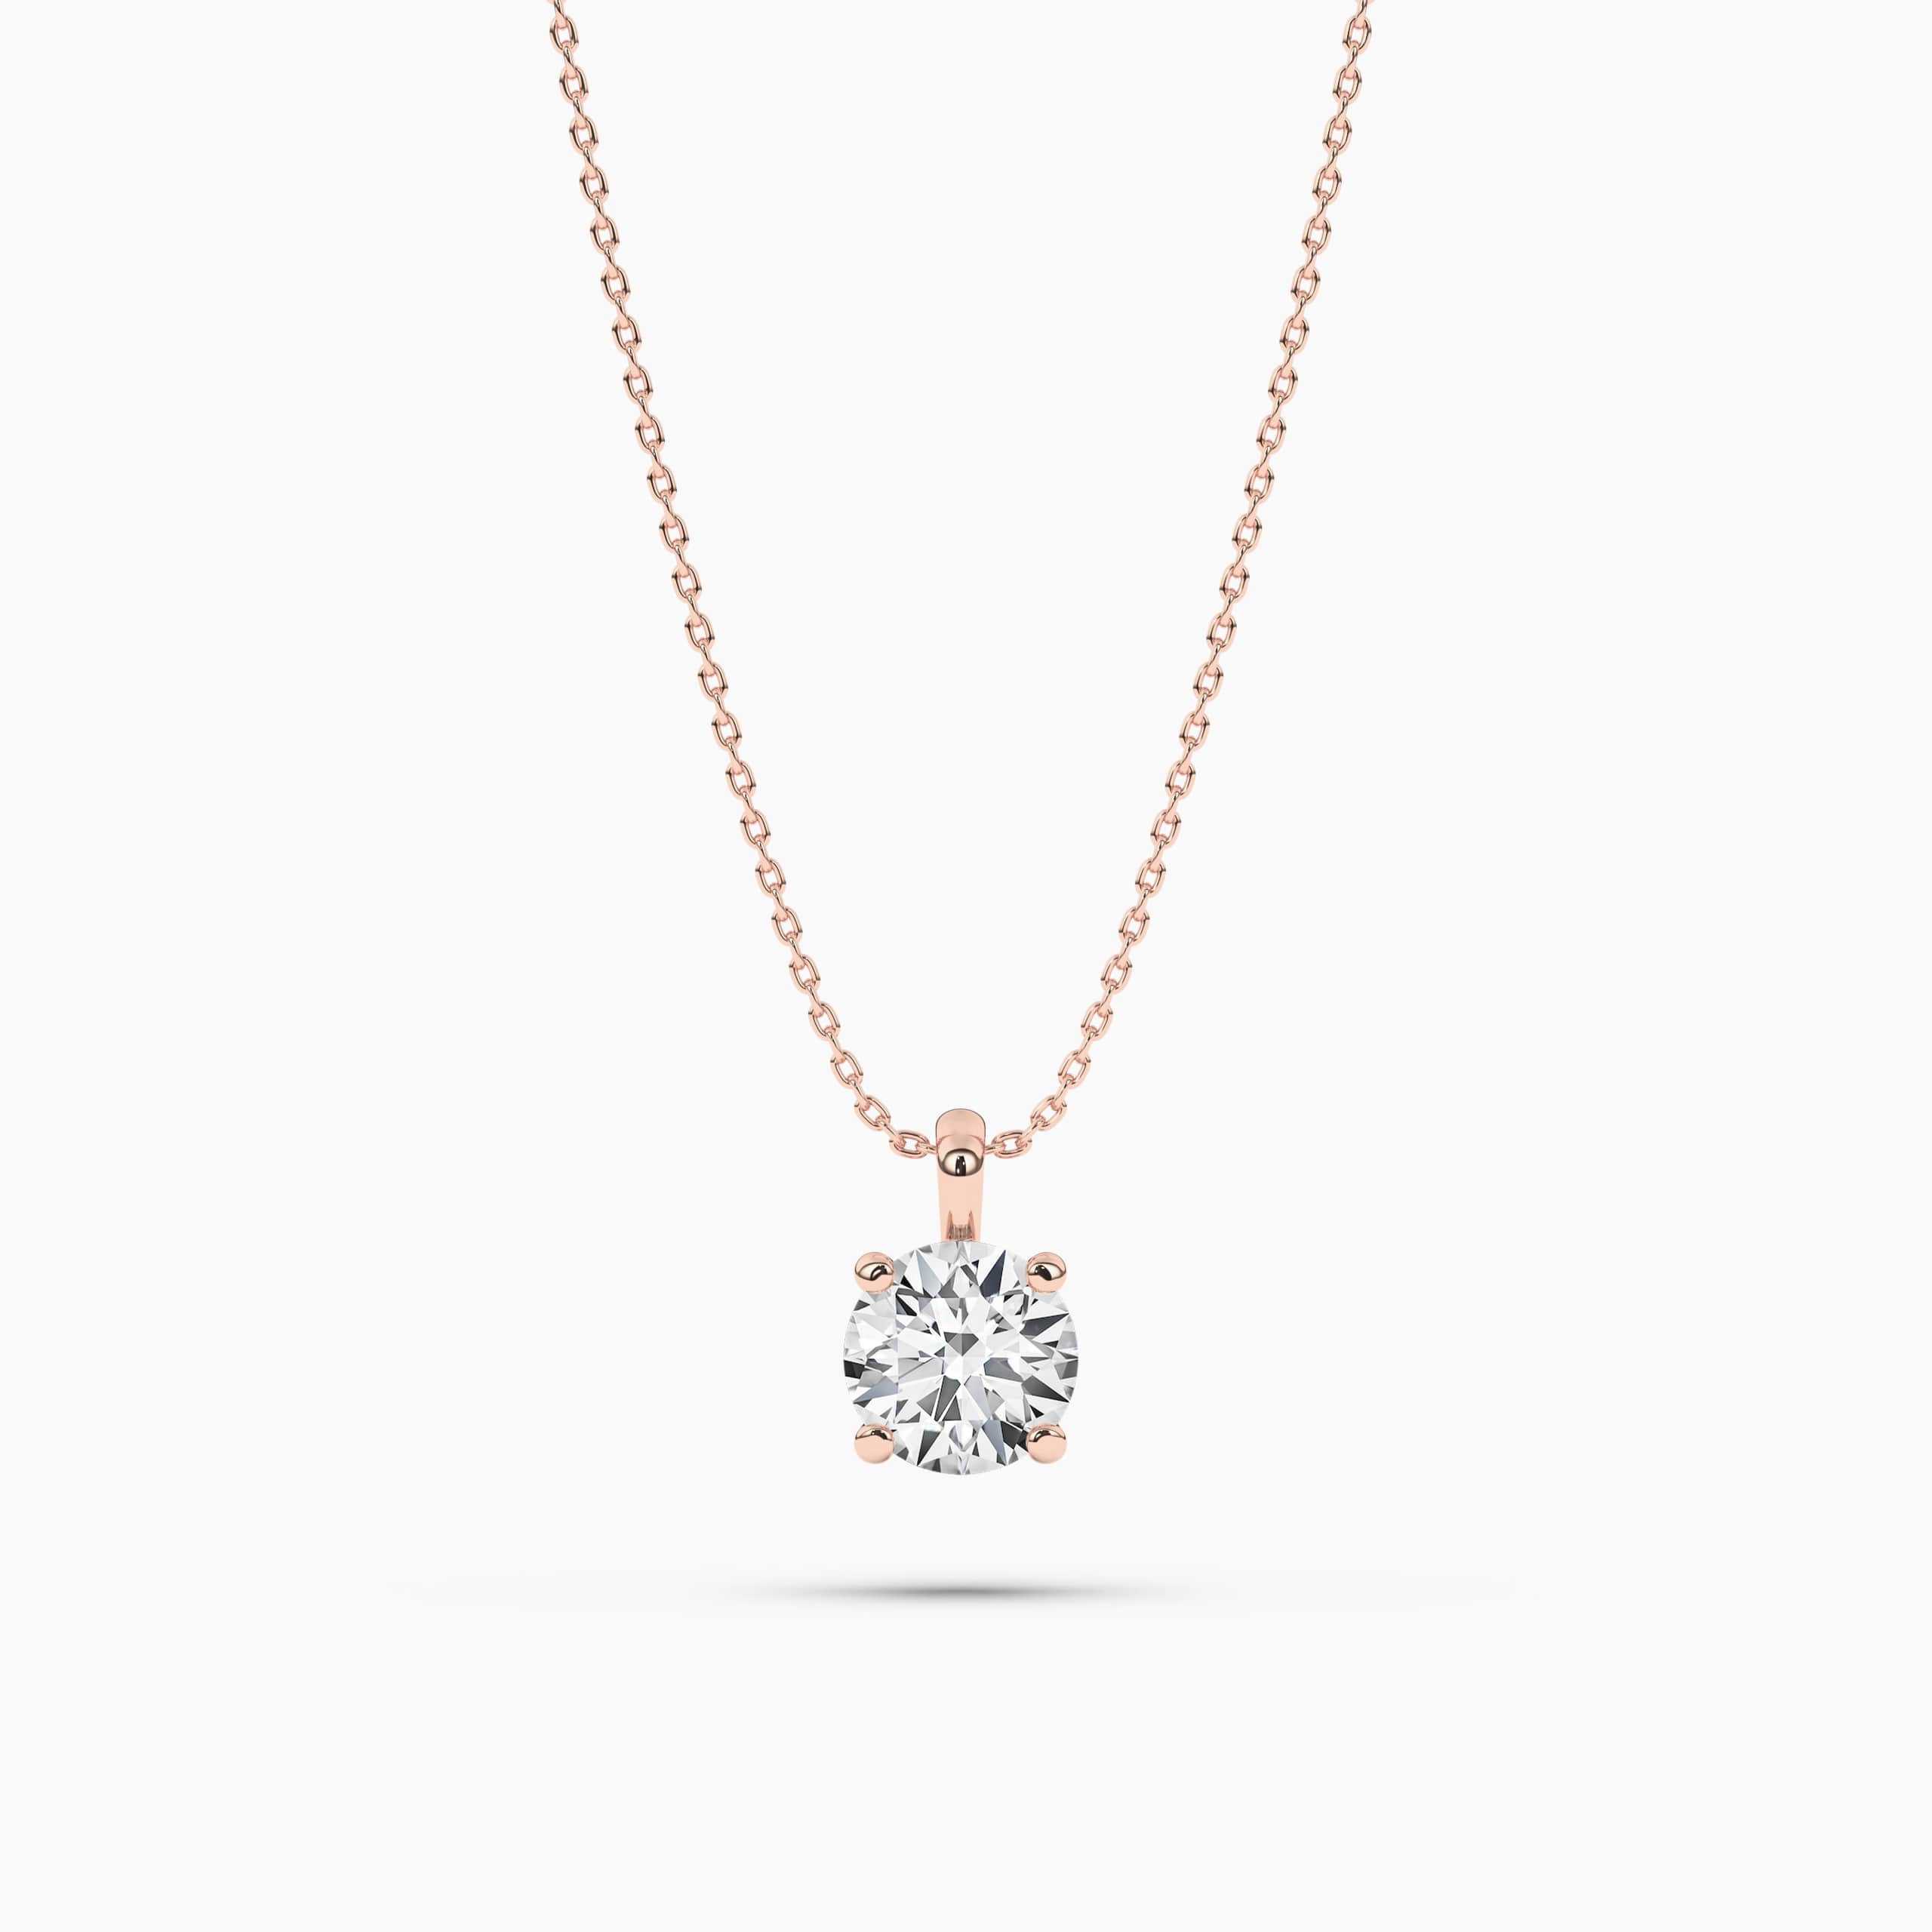 Round Cut Diamond Cluster Pendant Necklace in Rose Gold